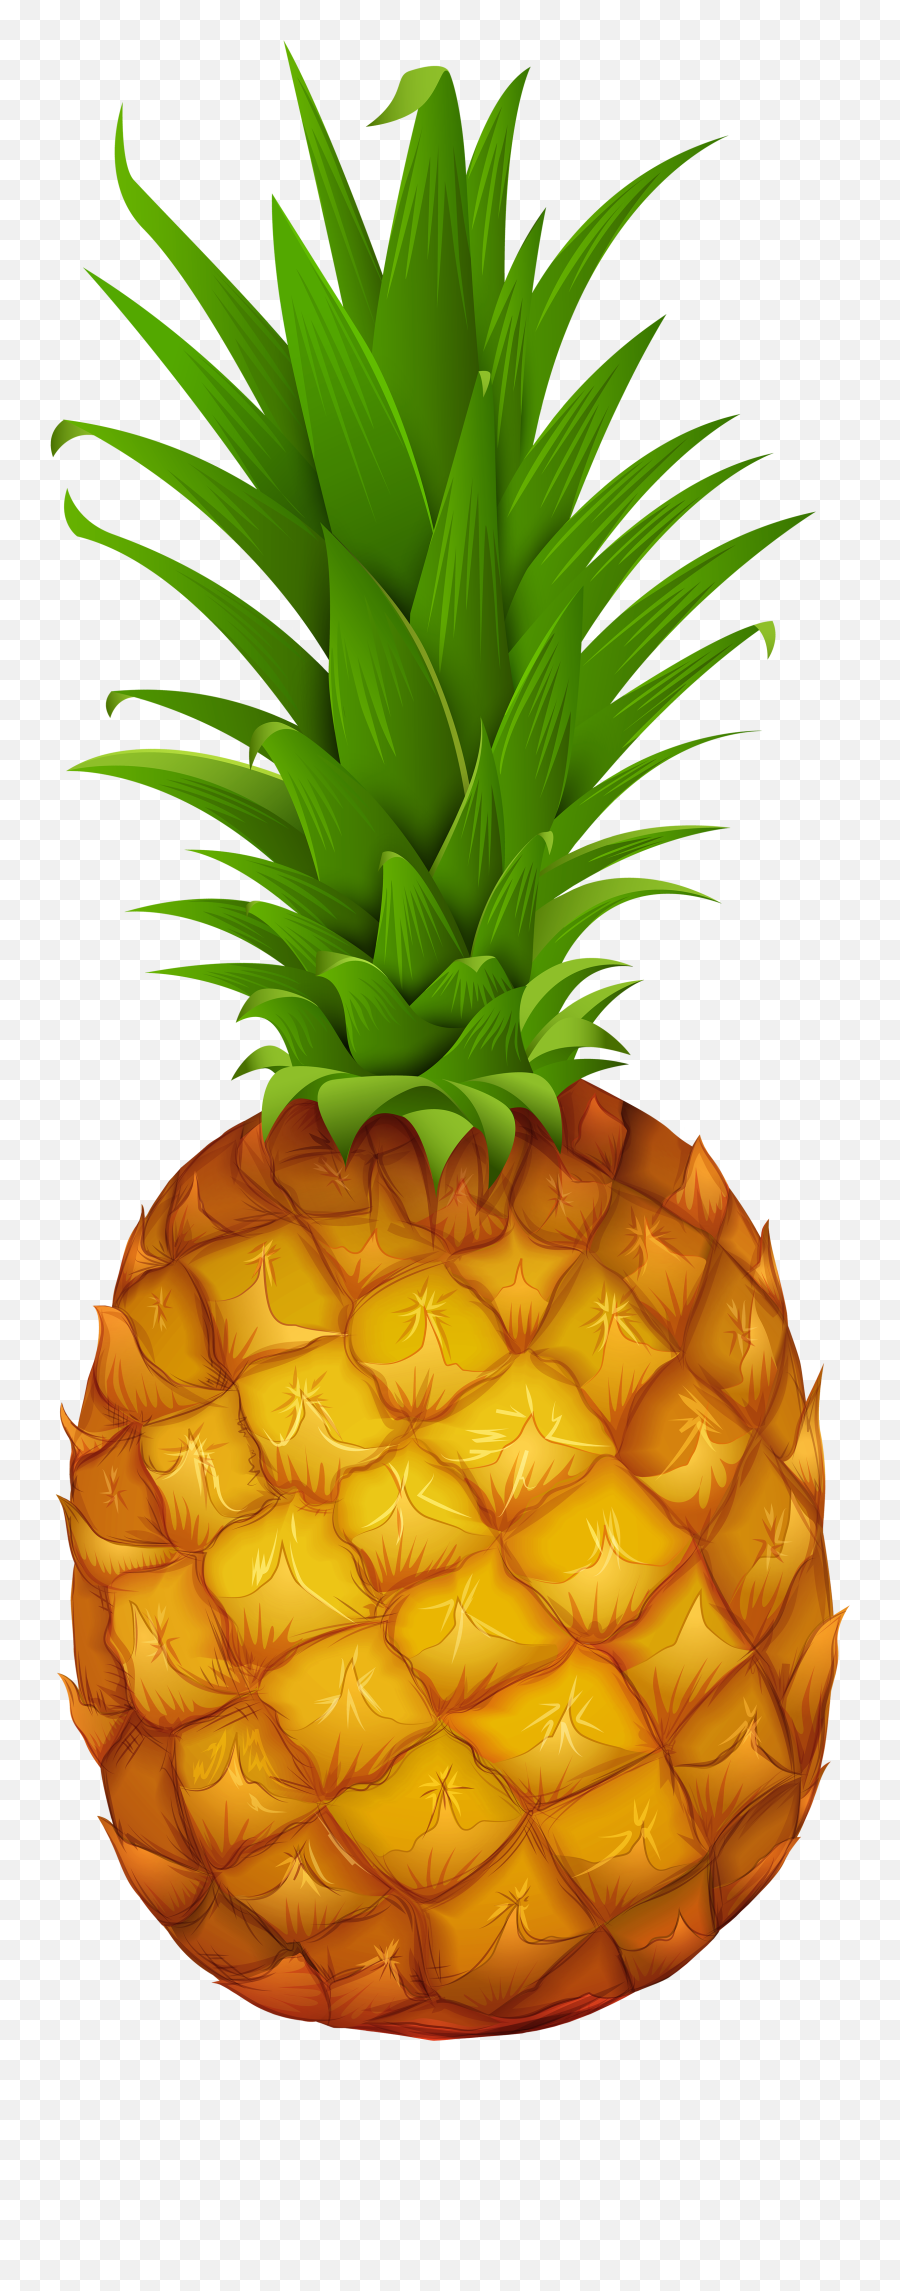 Png Files Clipart - Transparent Pineapple Png Clipart Emoji,Pineapple Clipart Black And White